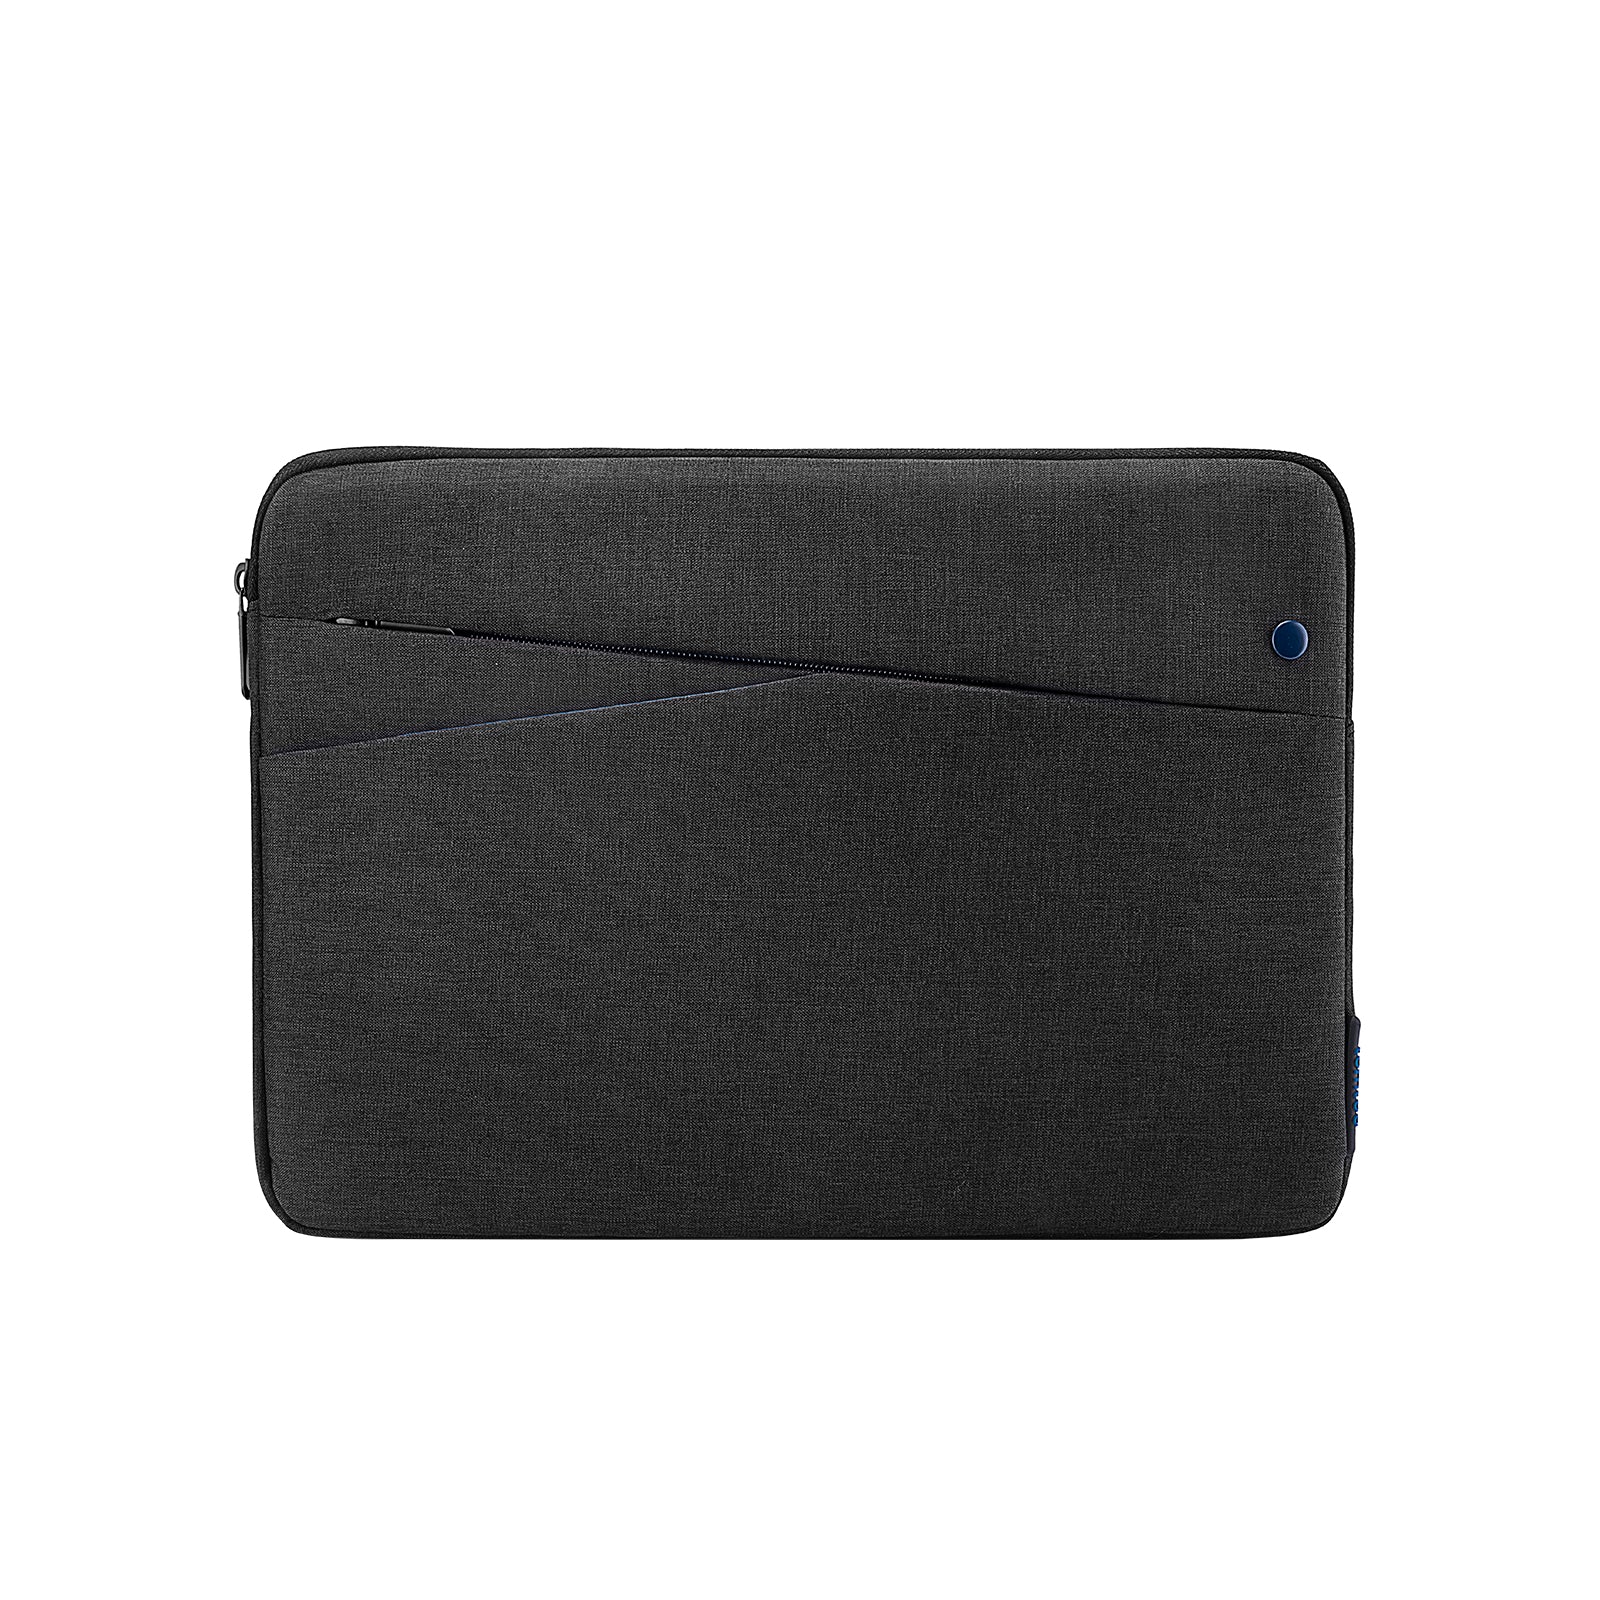 Light-B18 Tablet Sleeve for 12.9 inch iPad Pro